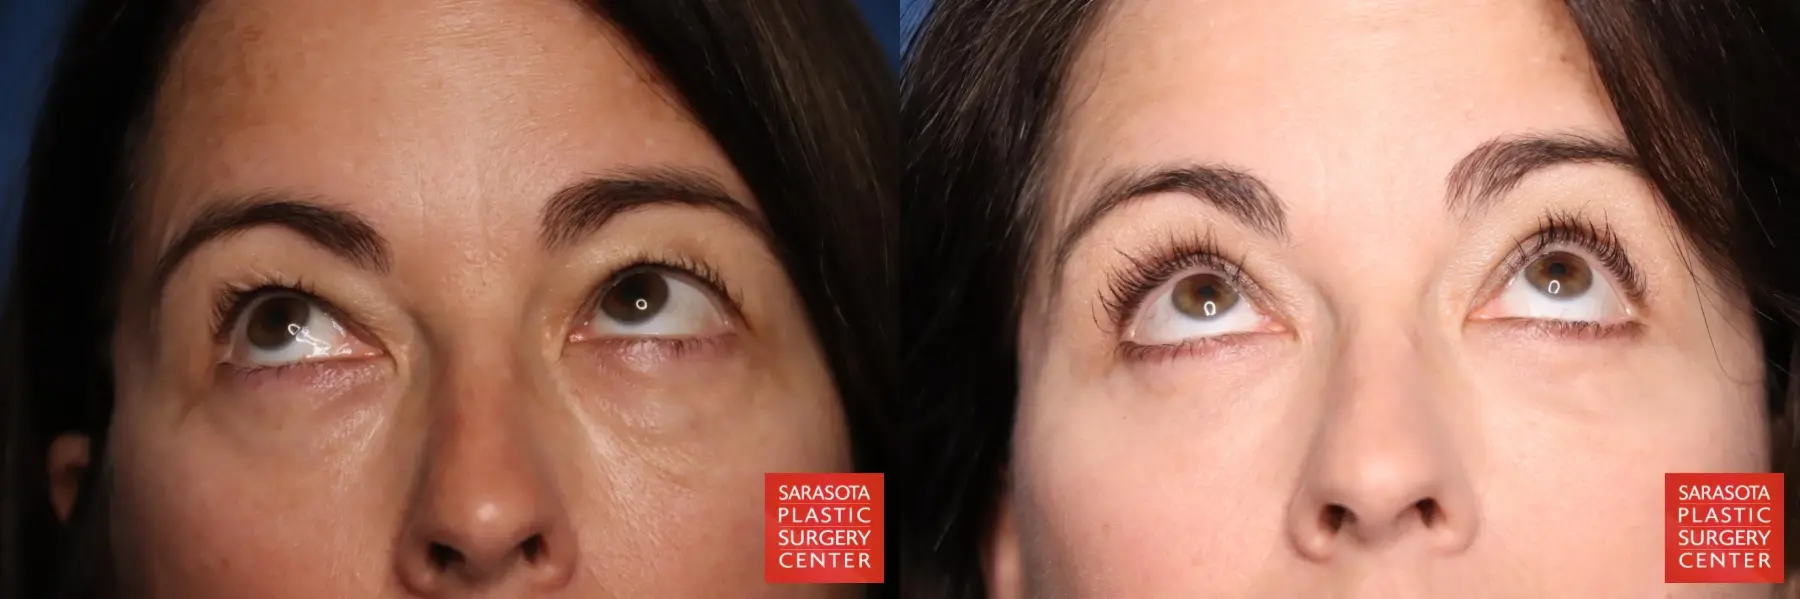 Eyelid Lift: Patient 3 - Before and After 2